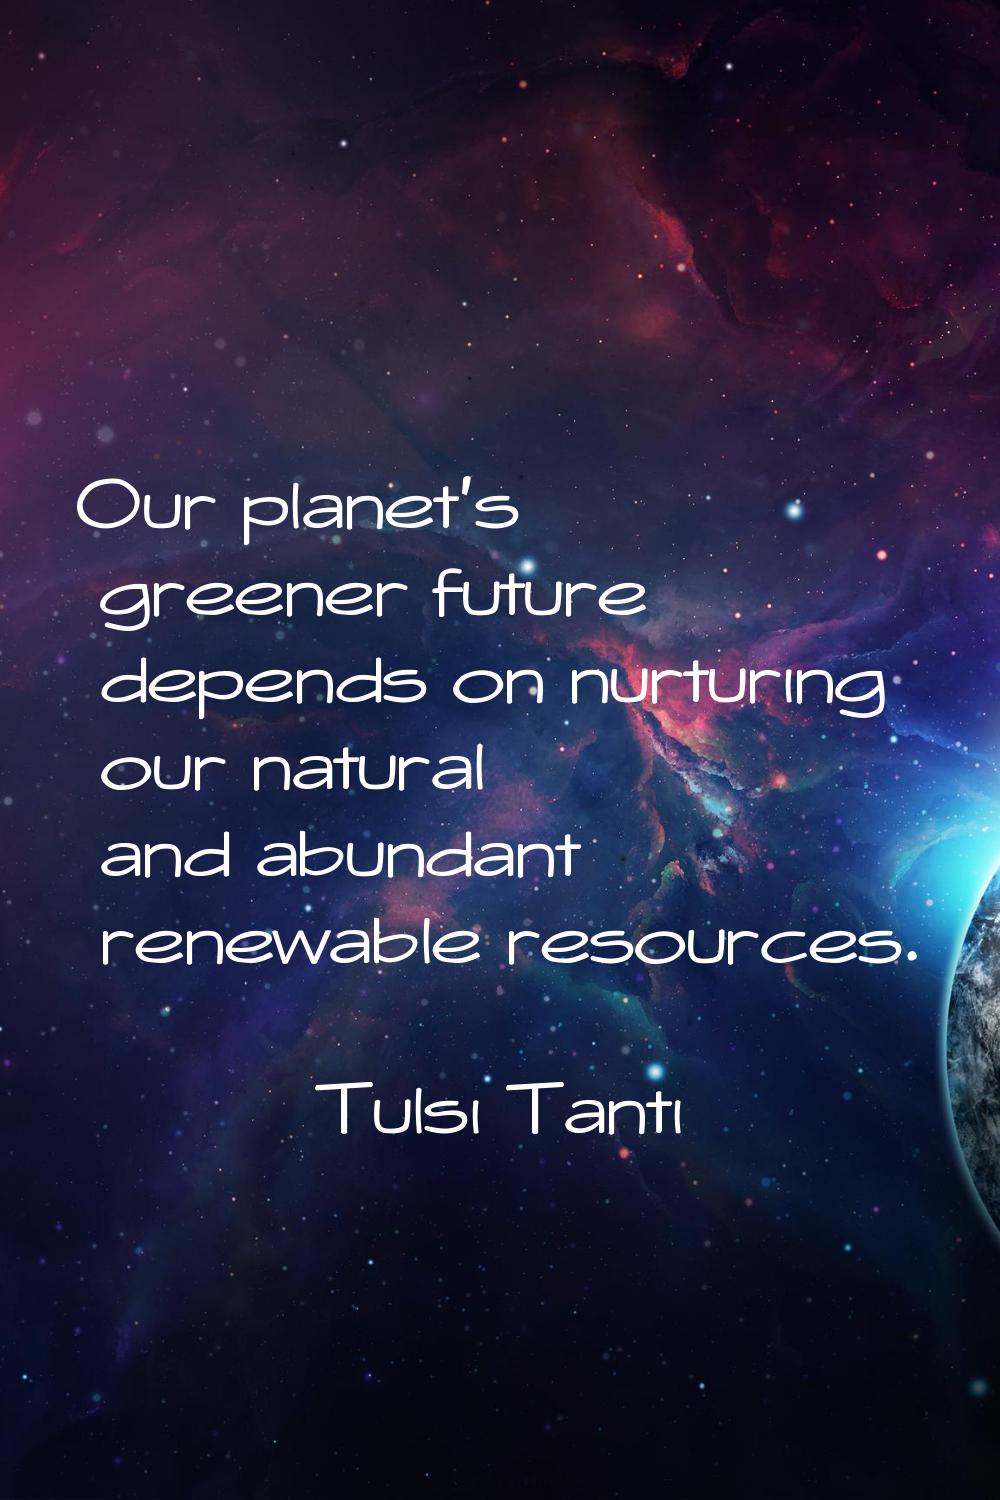 Our planet's greener future depends on nurturing our natural and abundant renewable resources.